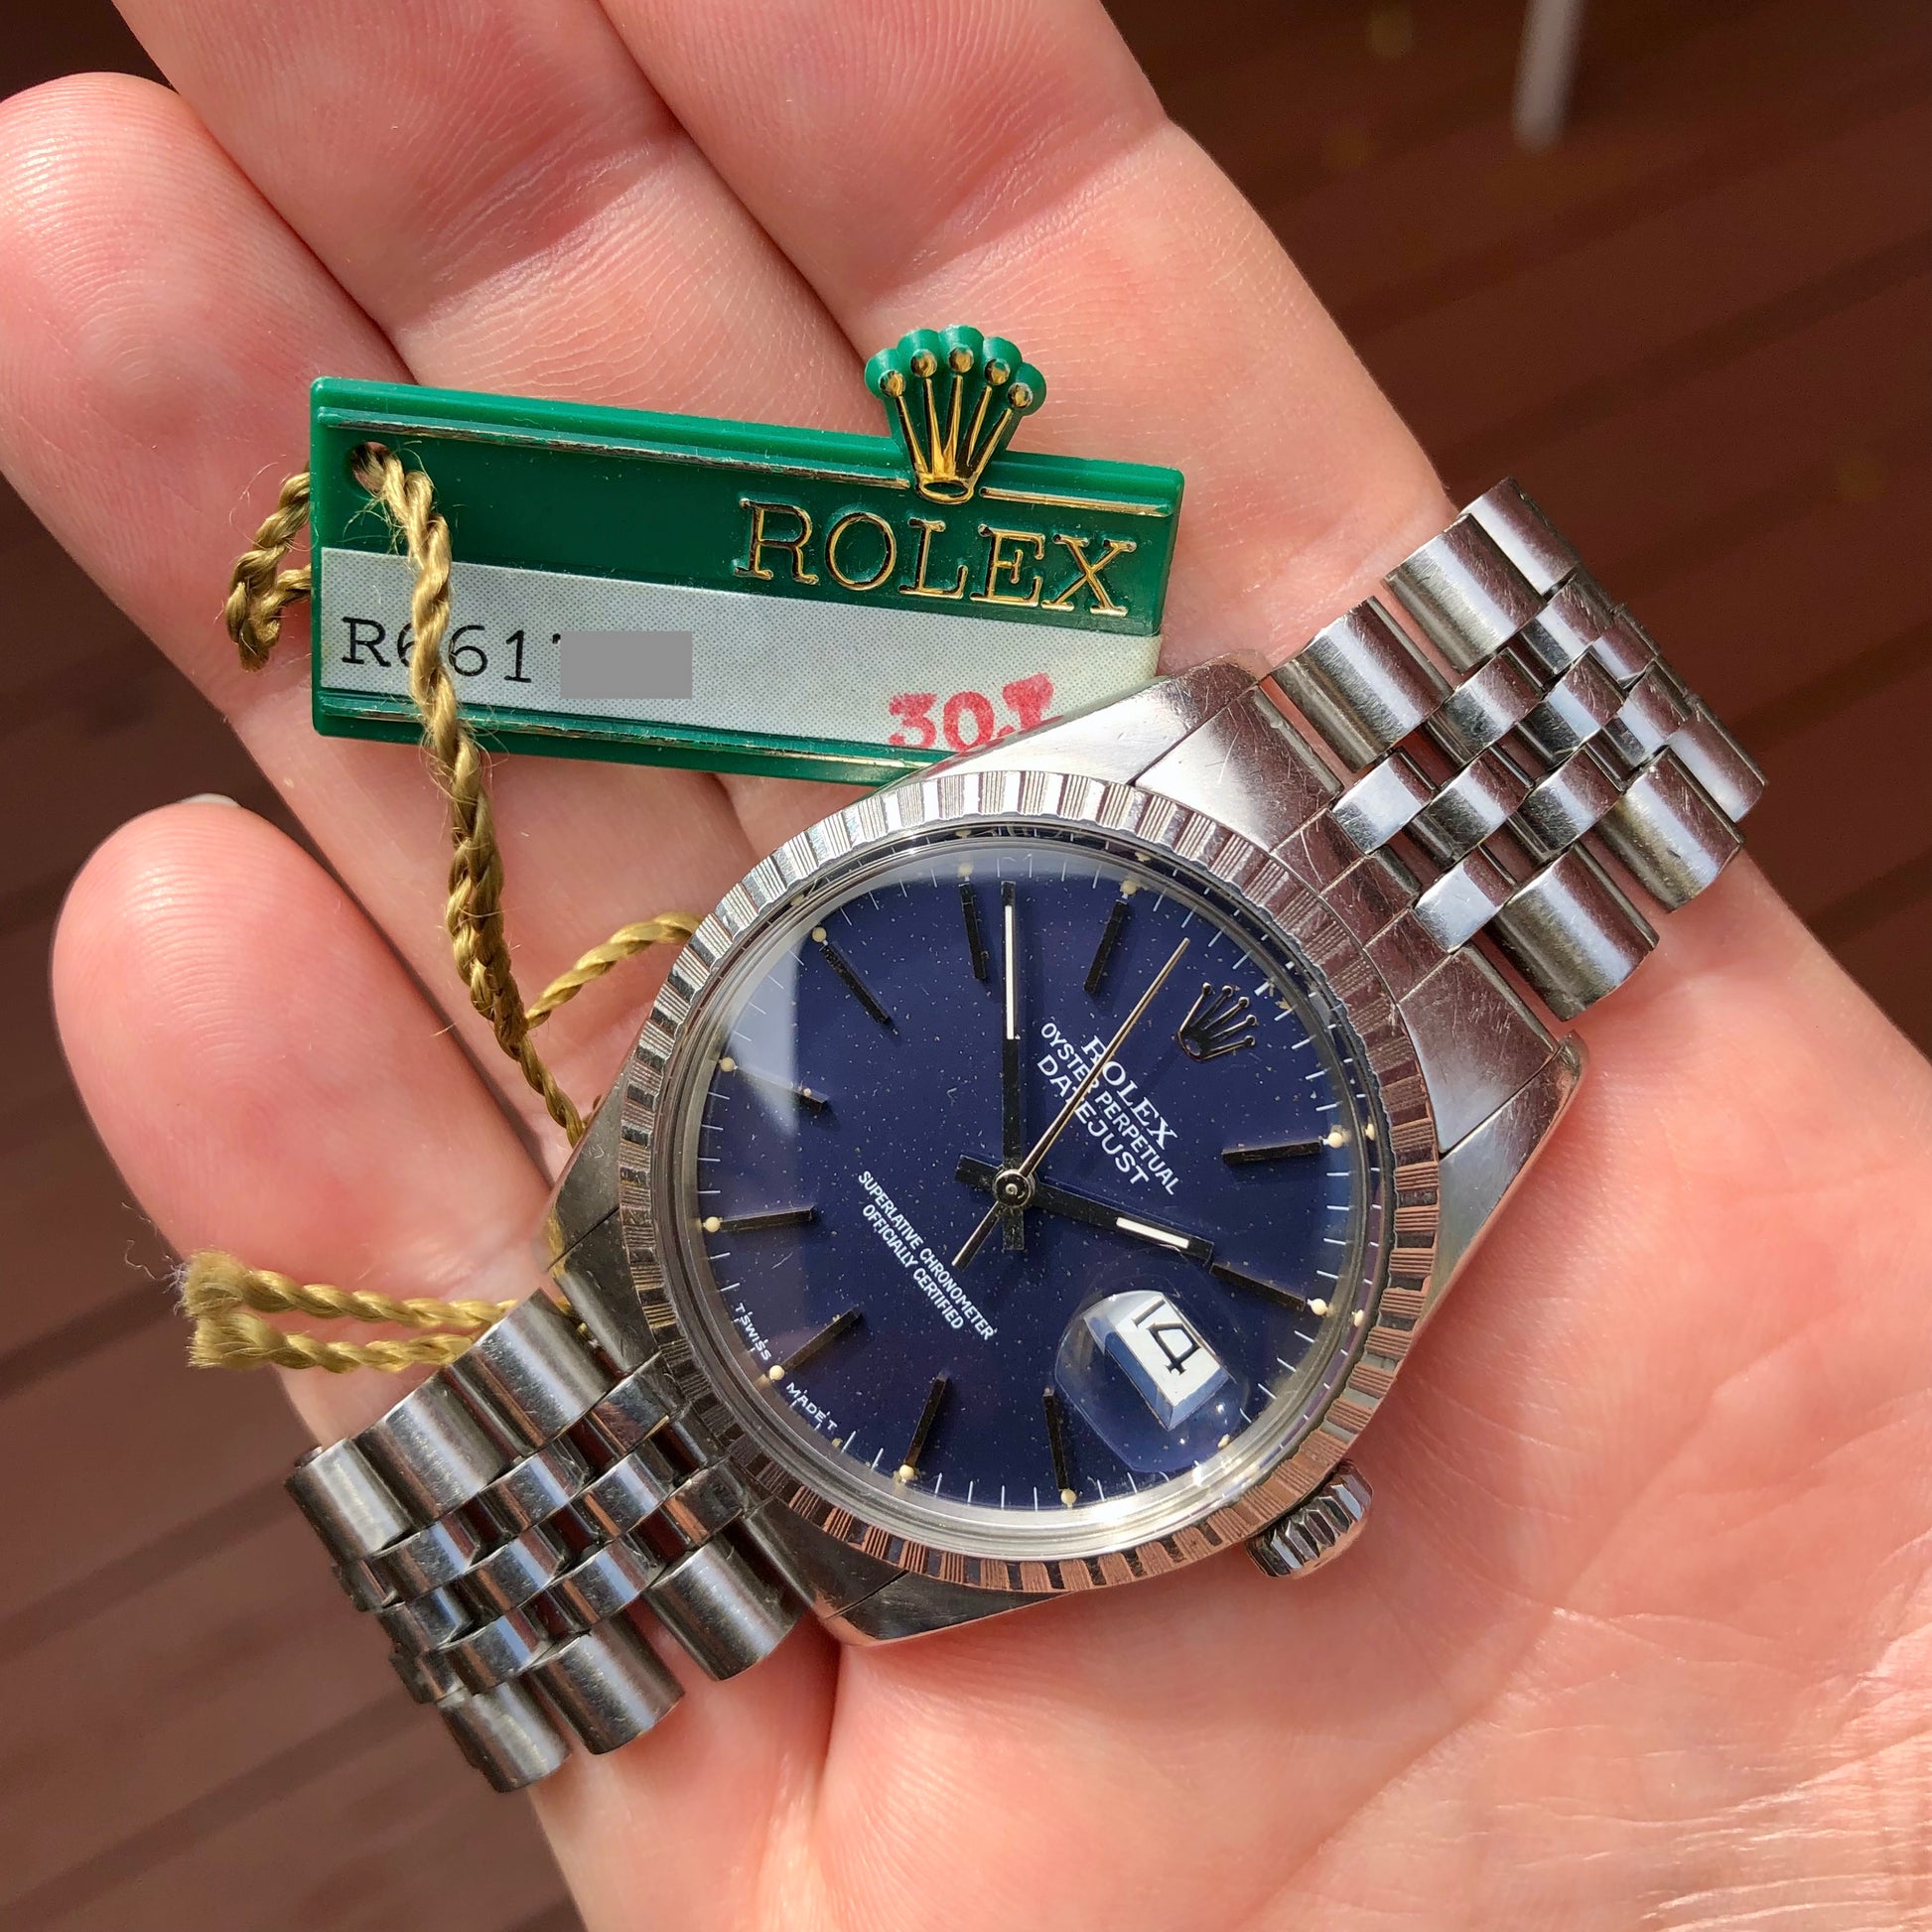 1987 Vintage Rolex Datejust 16030 Steel Tropical Violet Engine Turned Automatic Wristwatch - Hashtag Watch Company